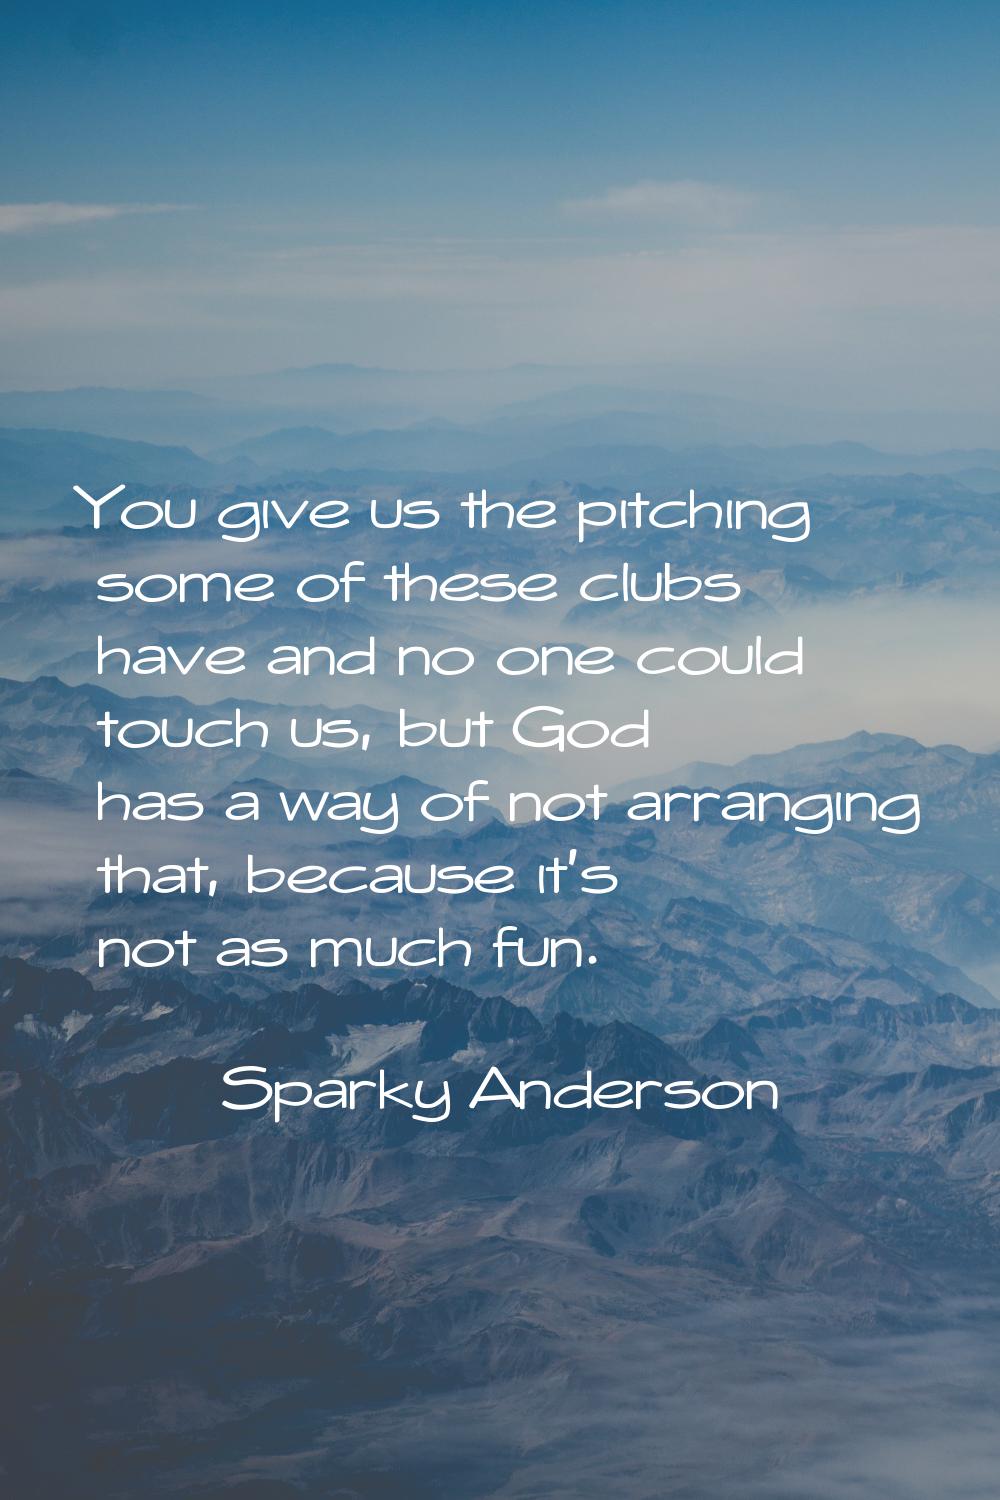 You give us the pitching some of these clubs have and no one could touch us, but God has a way of n